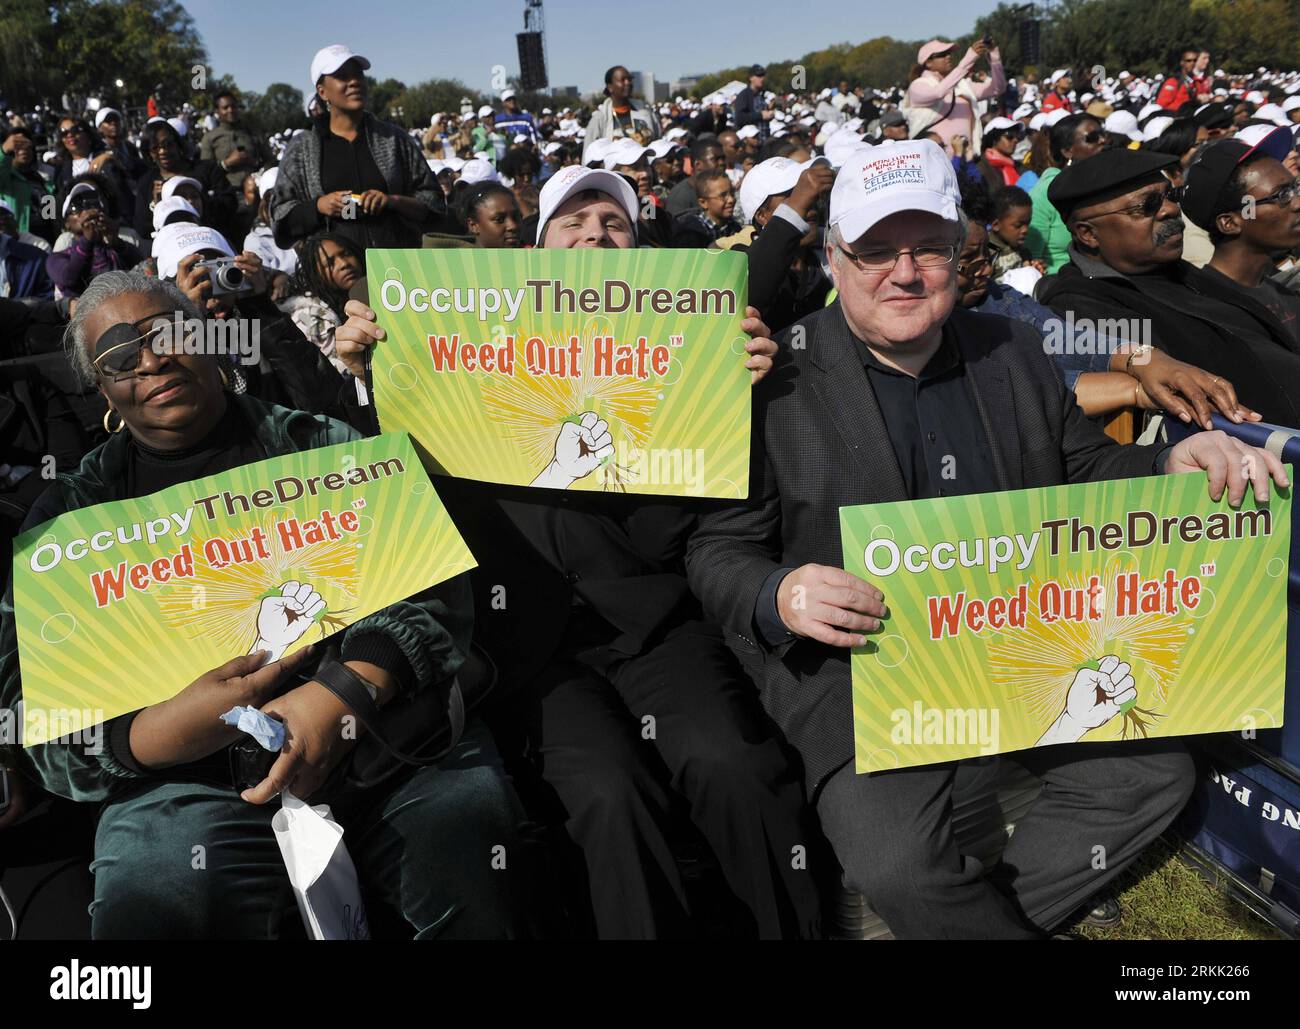 Bildnummer: 56186314  Datum: 16.10.2011  Copyright: imago/Xinhua (111016) -- WASHINGTON, Oct. 16, 2011 (Xinhua) -- hold banners with words Occupy The Dream, Weed Out Hate written on at the dedication ceremony of the Martin Luther King, Jr. Memorial in Washington, the United States, Oct. 16, 2011. Tens of thousand of people  attended the ceremony. (Xinhua/Zhang Jun) US-WASHINGTON-MARTIN LUTHER KING-DEDICATION CEREMONY PUBLICATIONxNOTxINxCHN Gesellschaft Politik USA Einweihung Denkmal xns x1x 2011 quer     56186314 Date 16 10 2011 Copyright Imago XINHUA  Washington OCT 16 2011 XINHUA Hold Banner Stock Photo